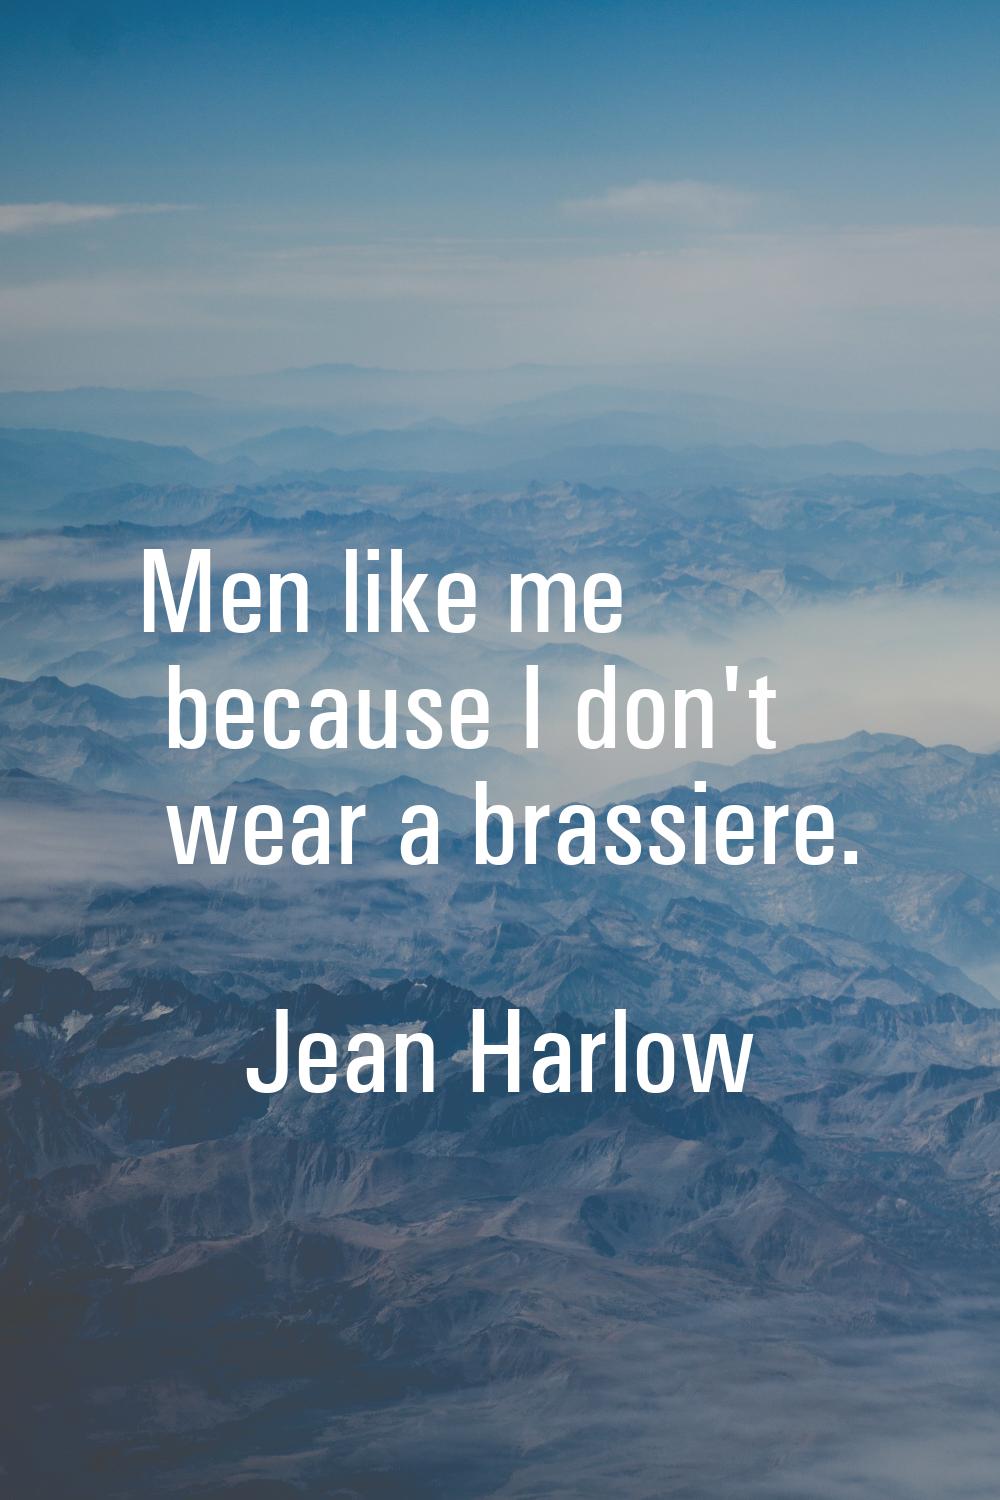 Men like me because I don't wear a brassiere.